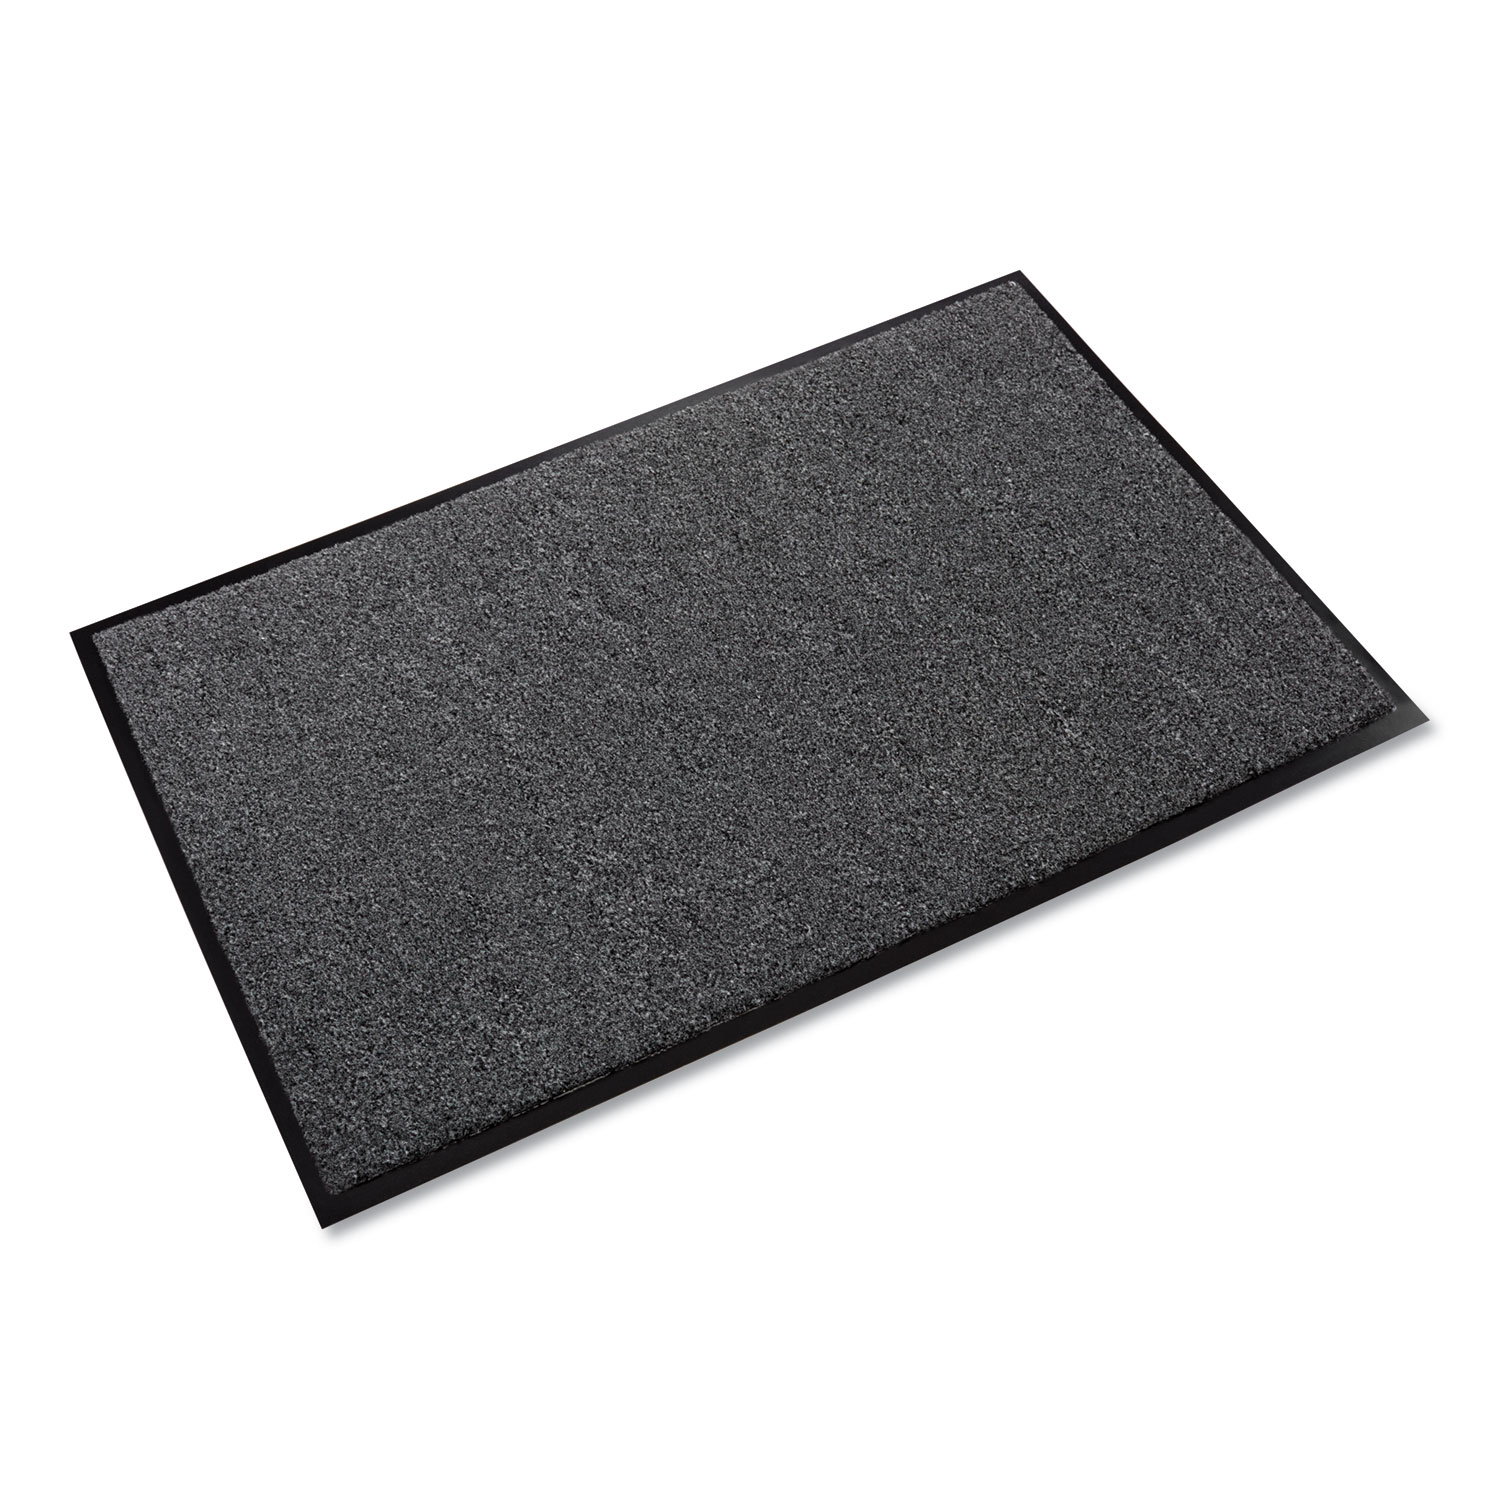  Crown GS 0046CH Rely-On Olefin Indoor Wiper Mat, 48 x 72, Charcoal (CWNGS0046CH) 